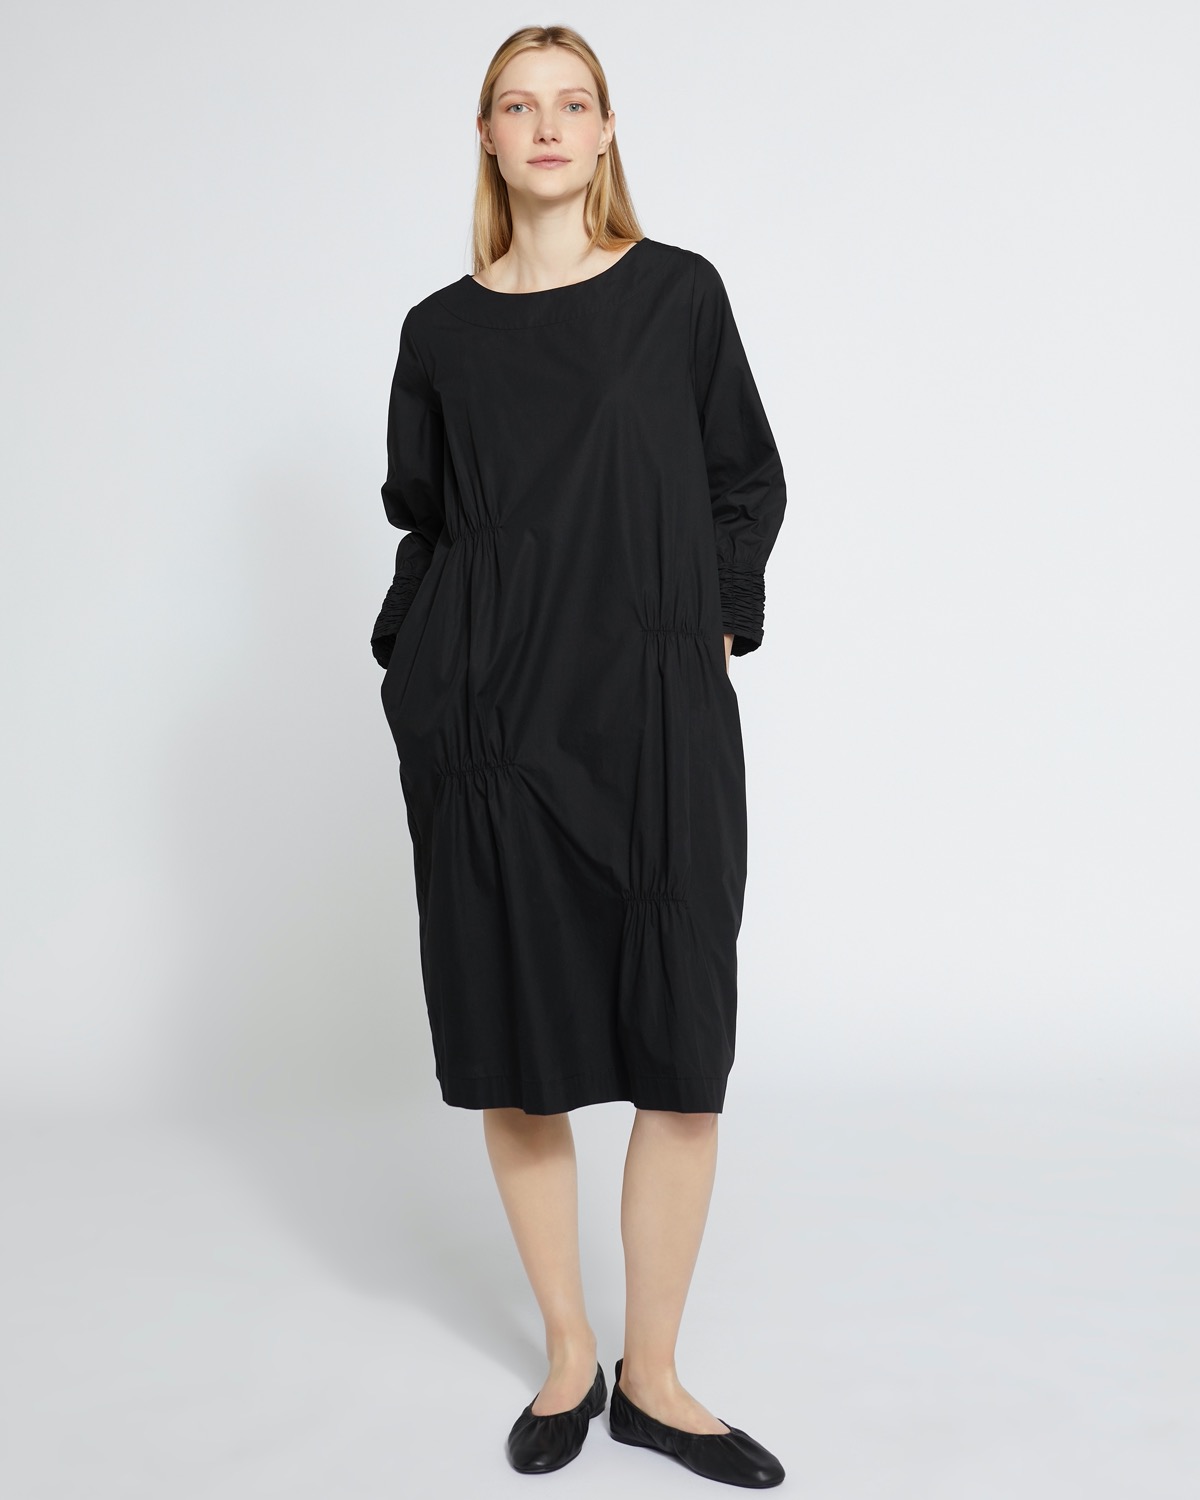 Dunnes Stores  Black Carolyn Donnelly The Edit Elastic Waist